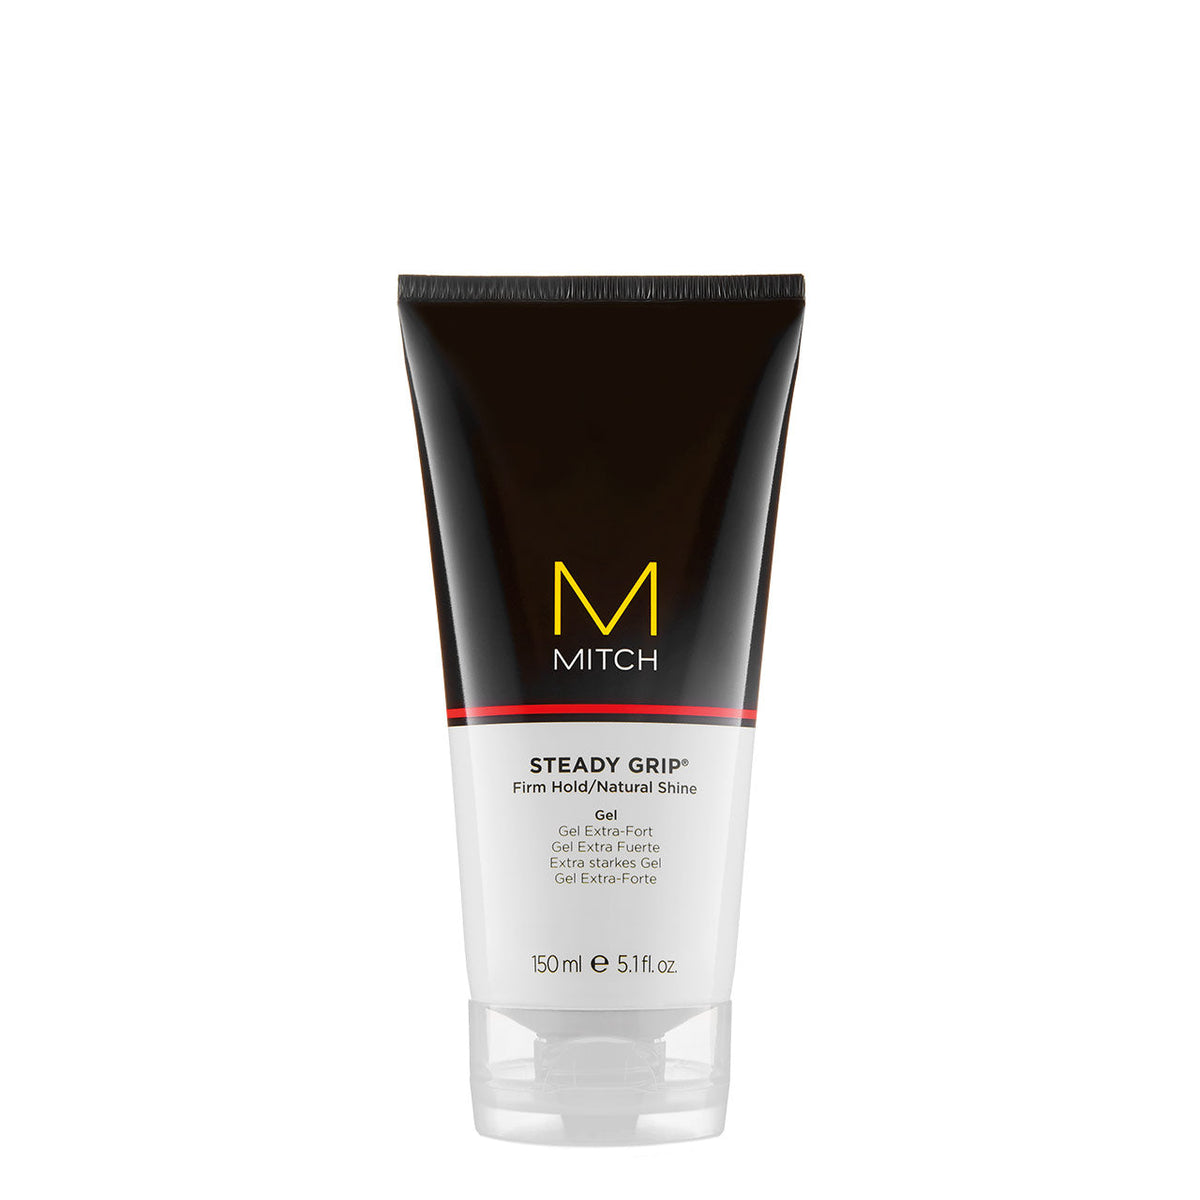 Mitch Grooming Steady Grip Gel - 150ML - by Paul Mitchell |ProCare Outlet|